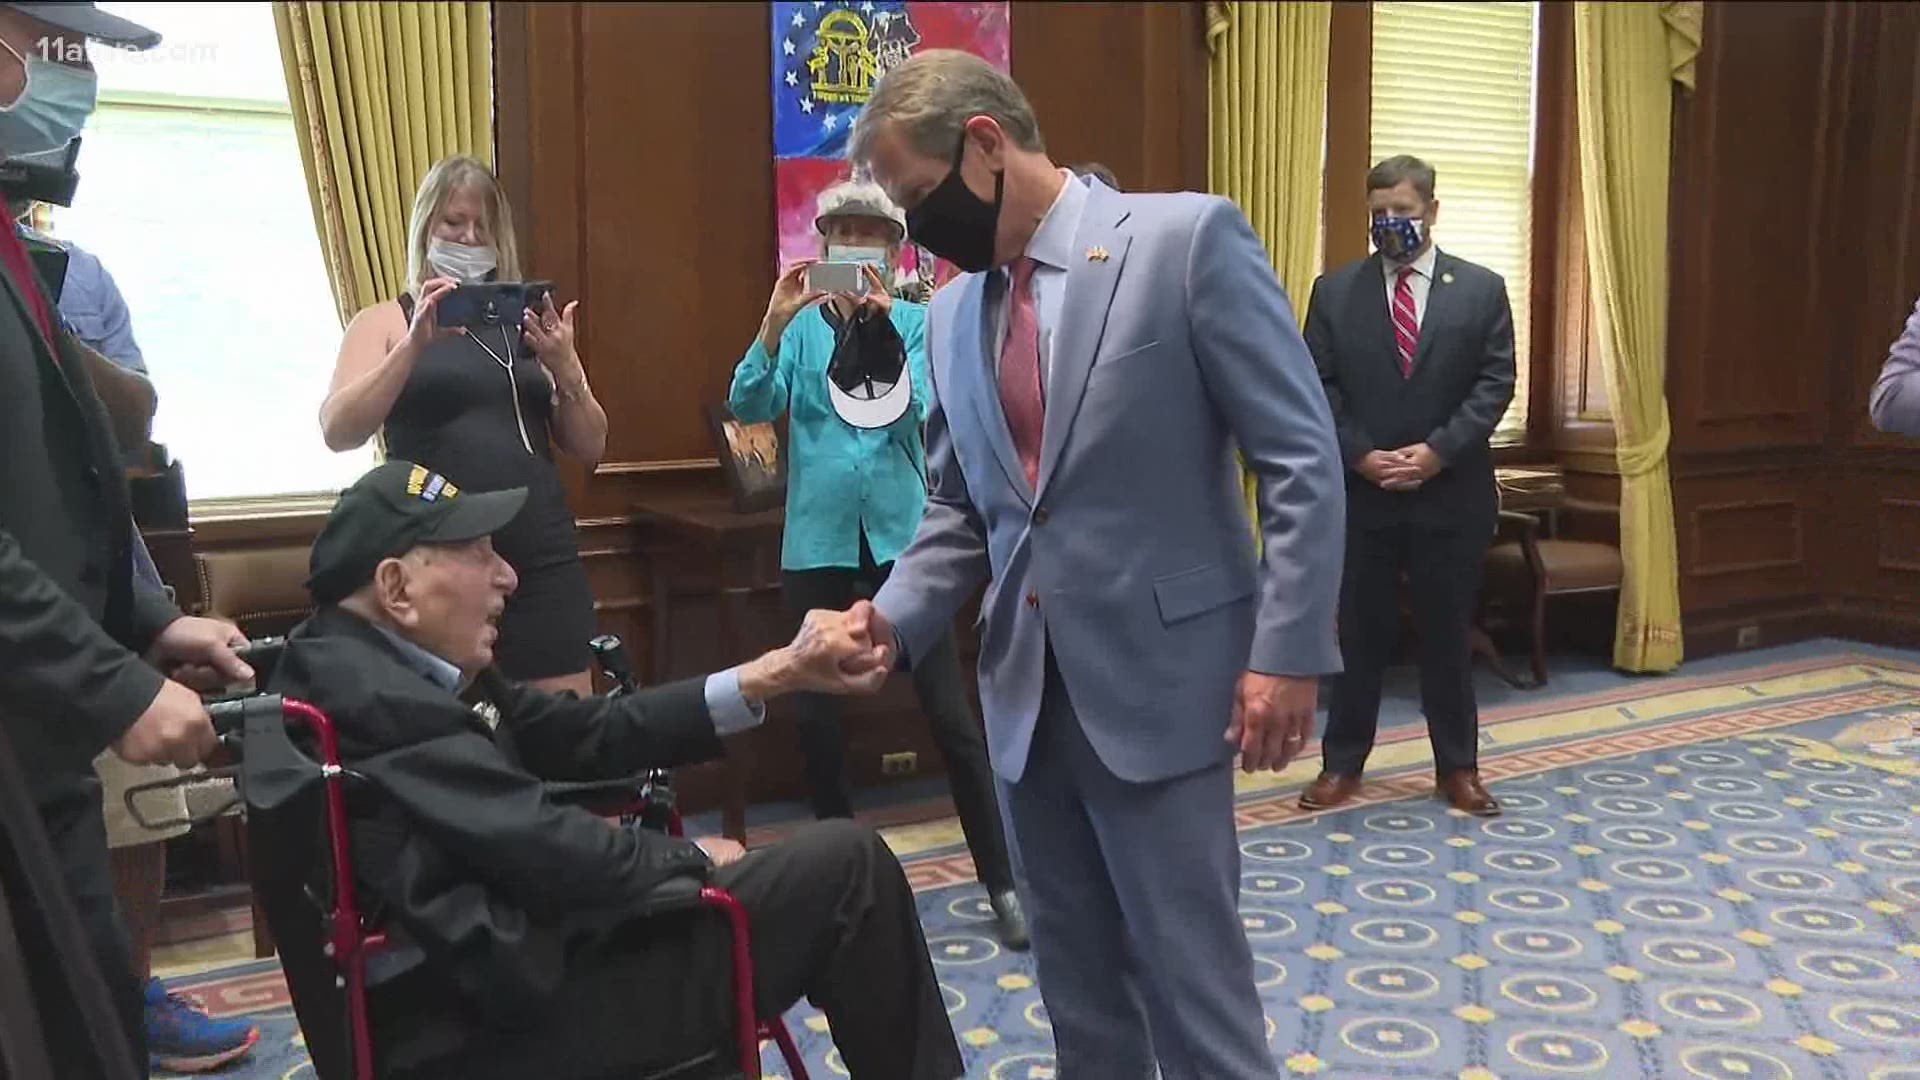 Walton is one of the country's last remaining vets from World War II.